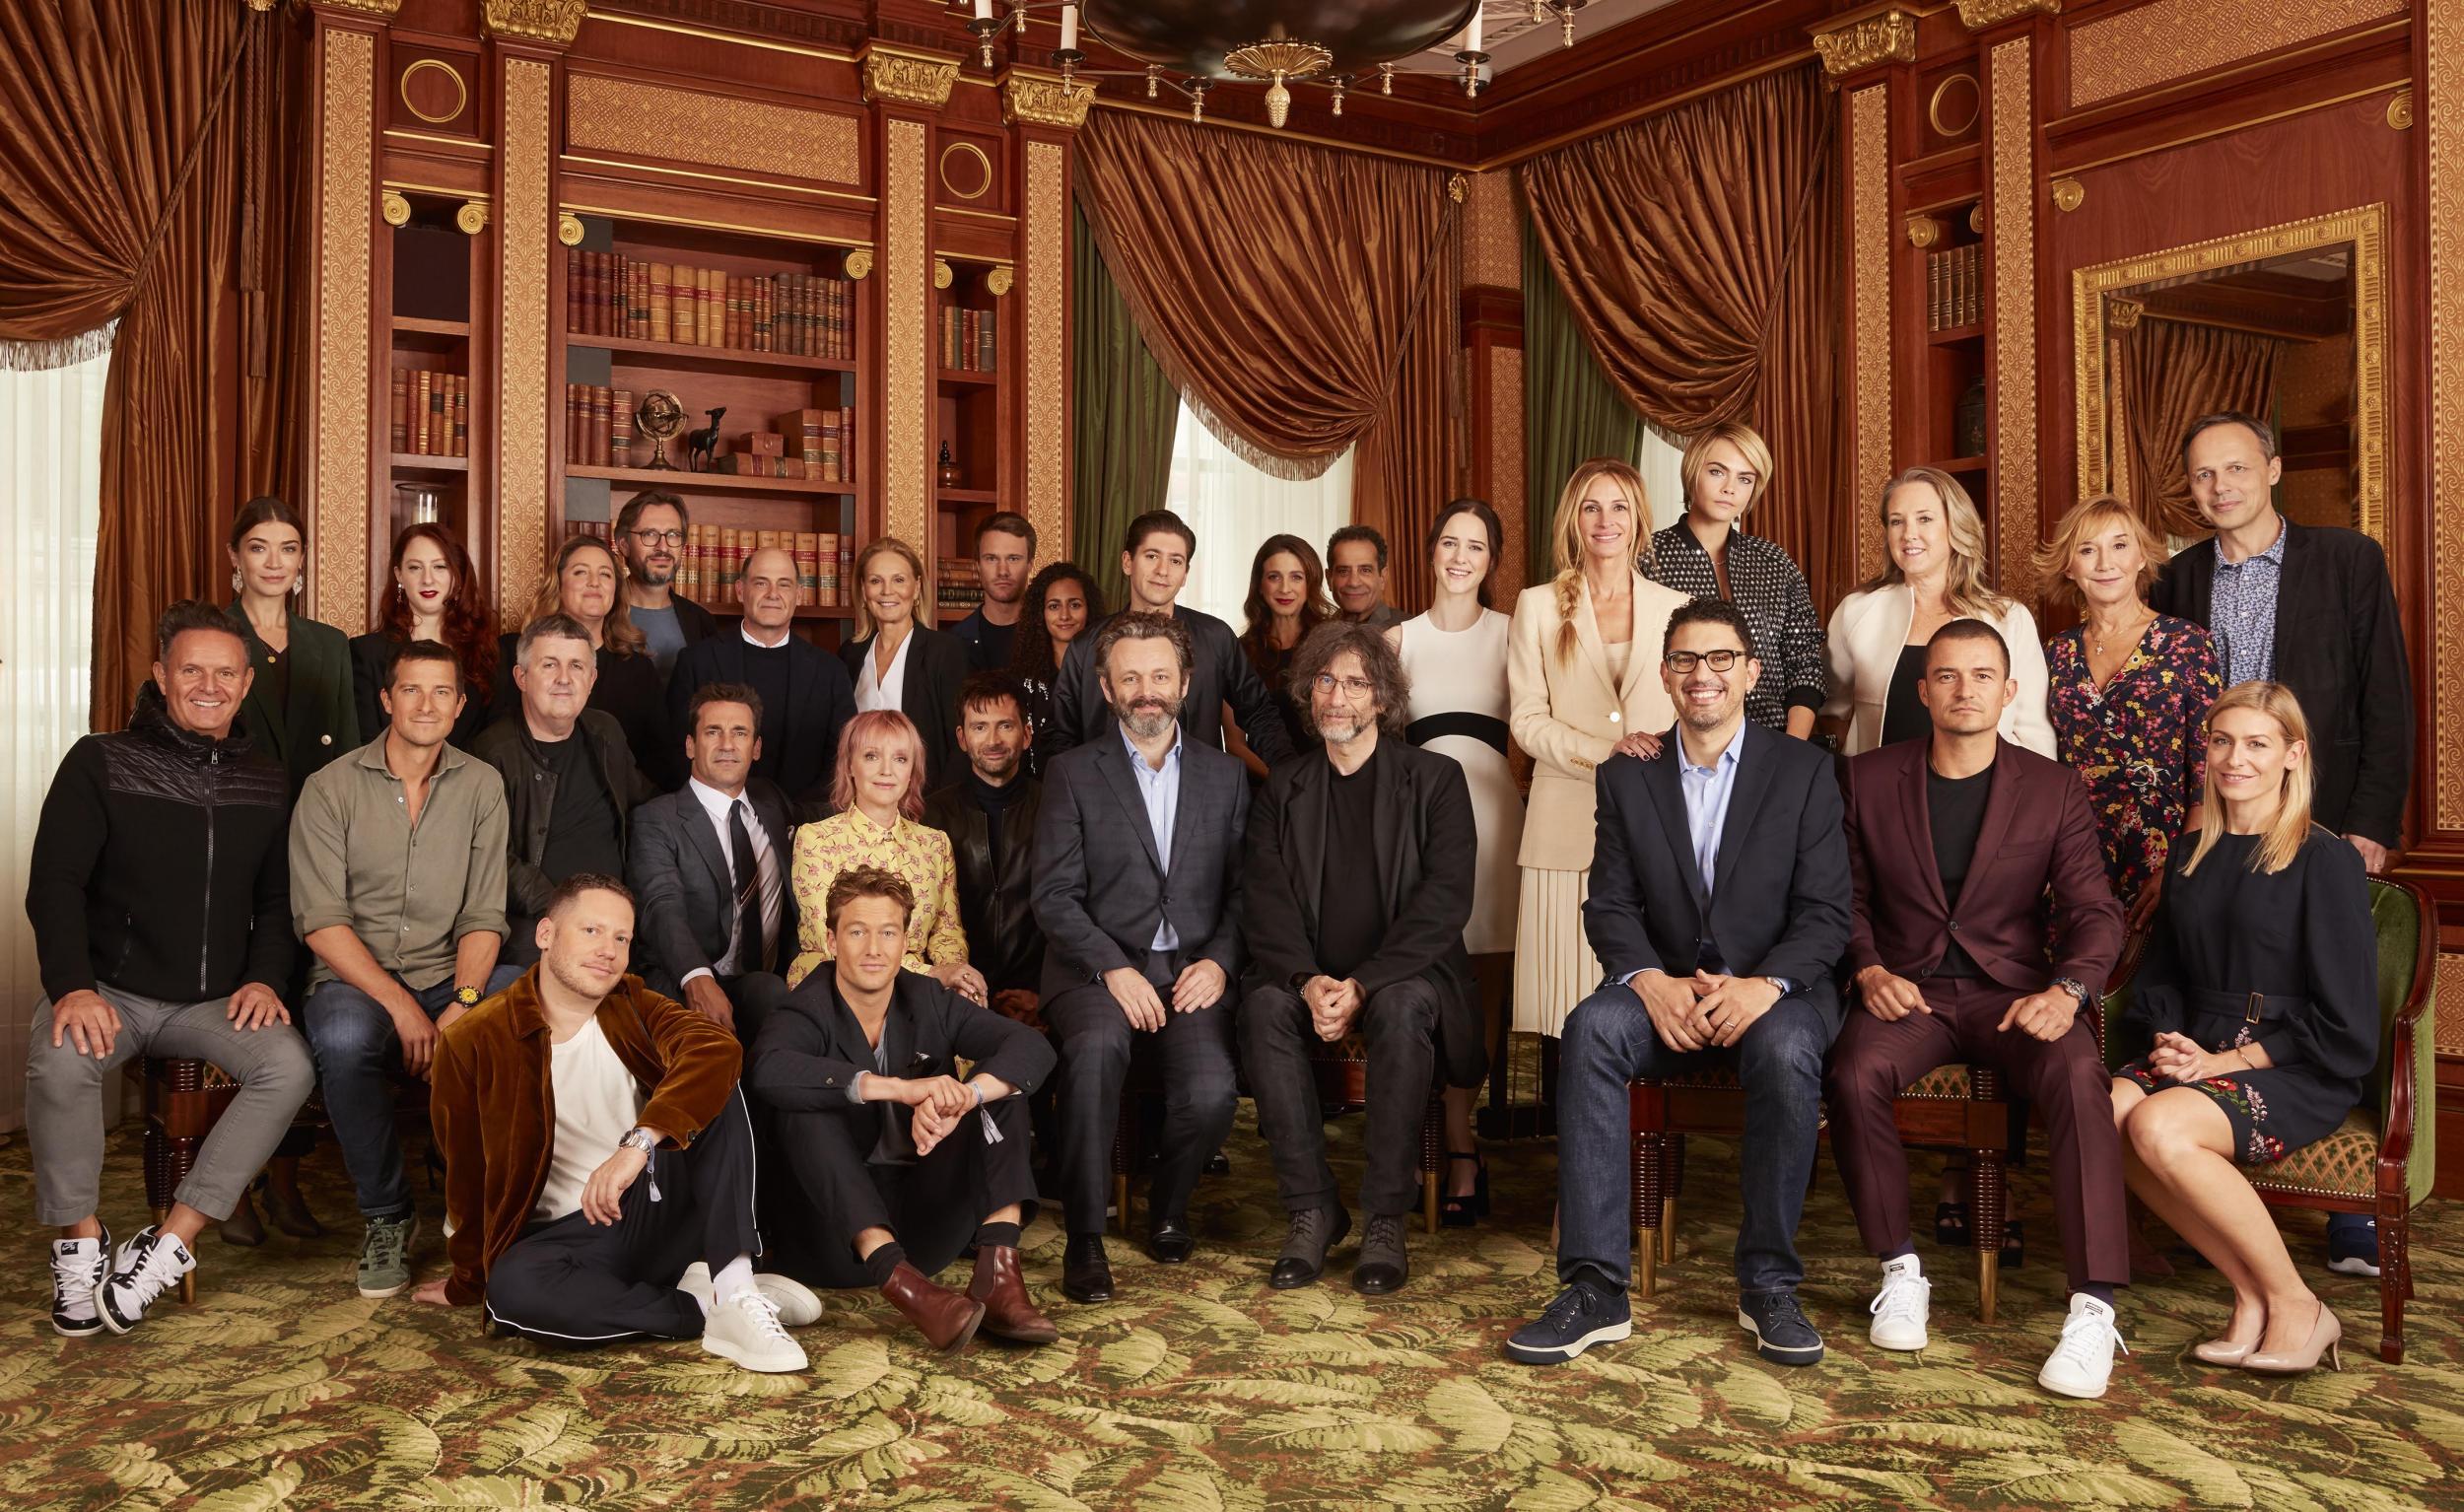 Key cast and crew from shows including 'Homecoming', 'The Marvelous Mrs Maisel' and 'Good Omens' at the Prime Video launch (Amazon)